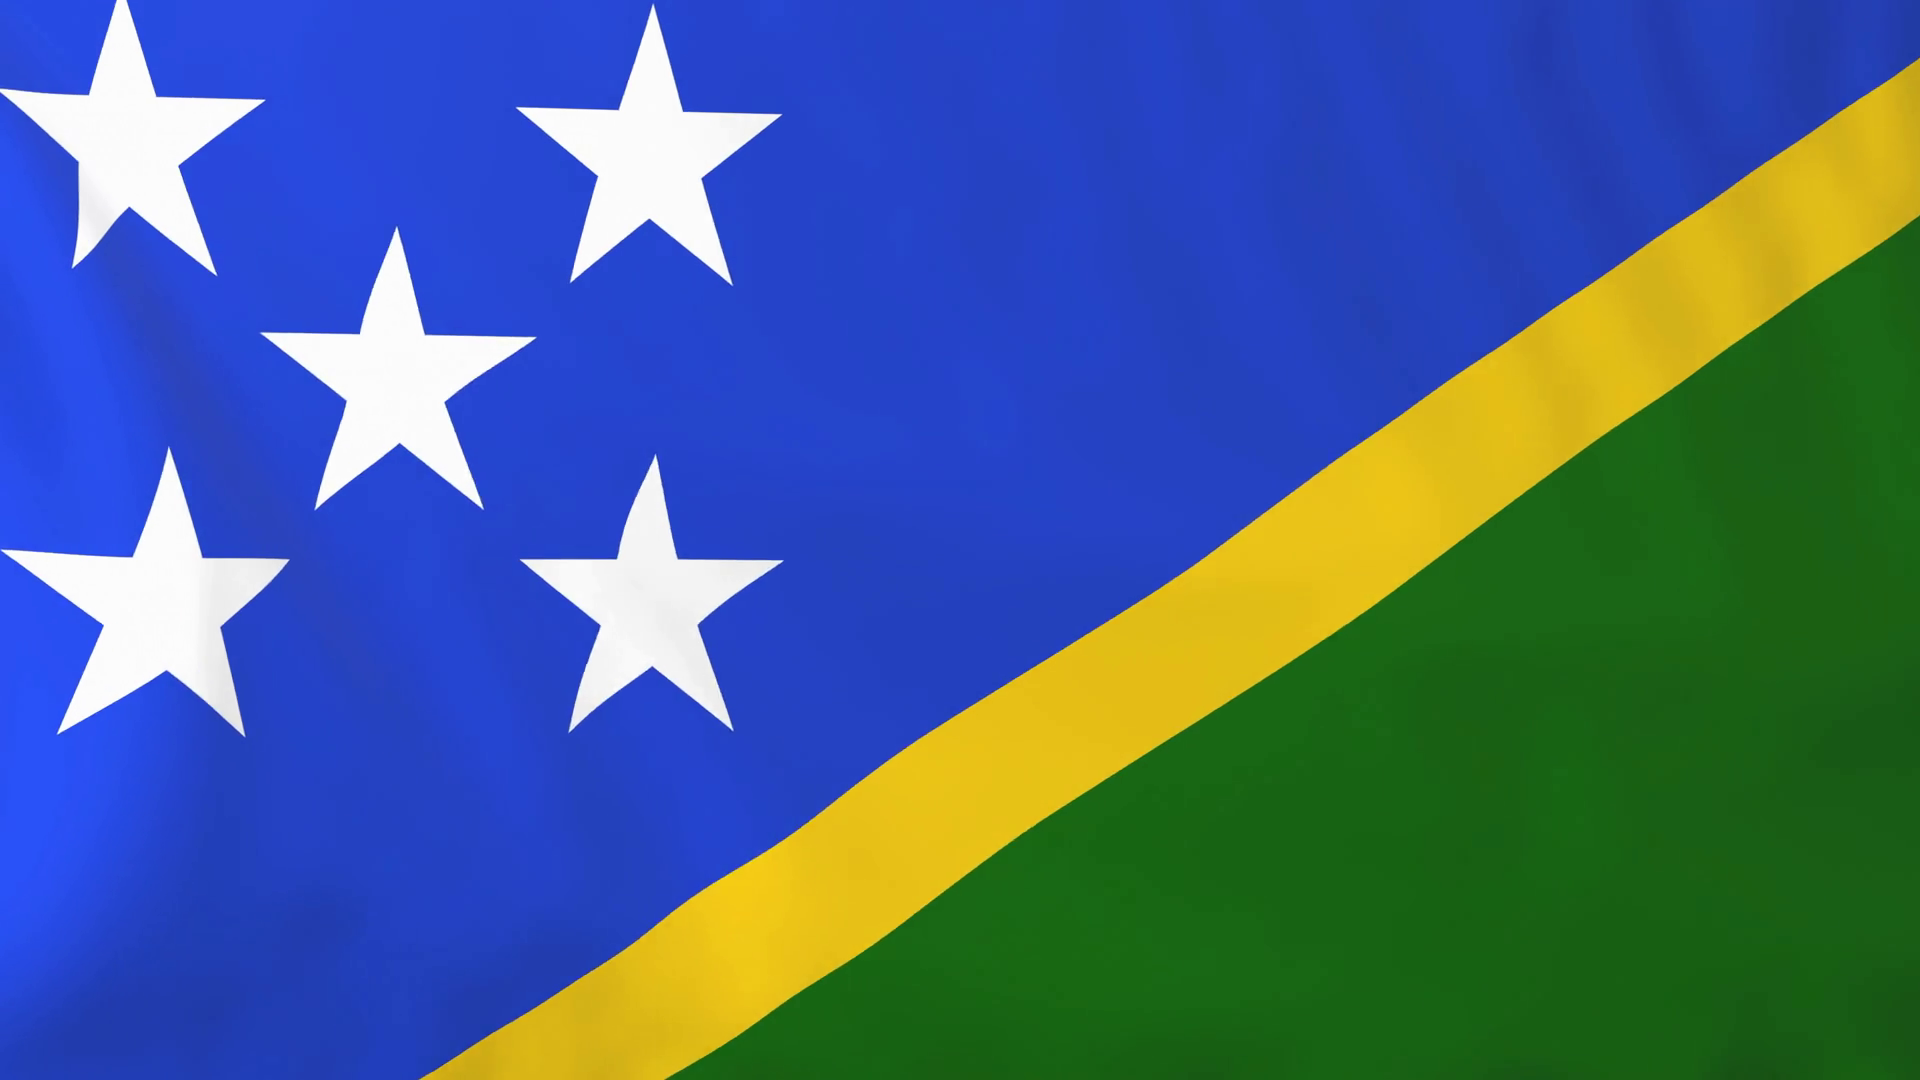 flag of solomon islands rendered using official design and colors seamless loop svujbrqzx thumbnail full01